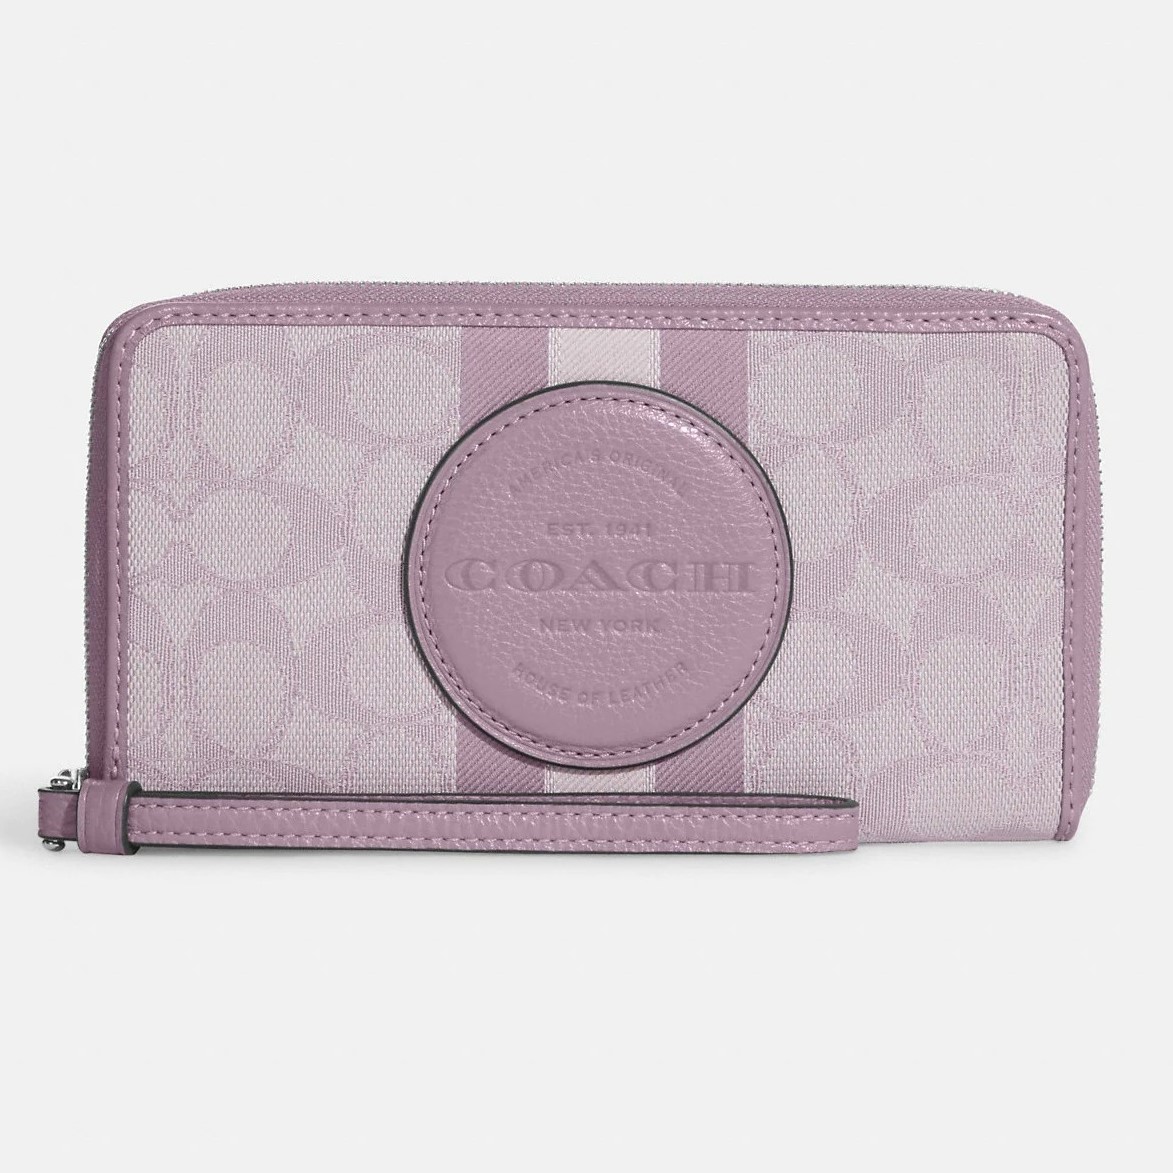 VÍ COACH DEMPSEY LARGE PHONE WALLET IN SIGNATURE JACQUARD WITH STRIPE AND COACH PATCH 4